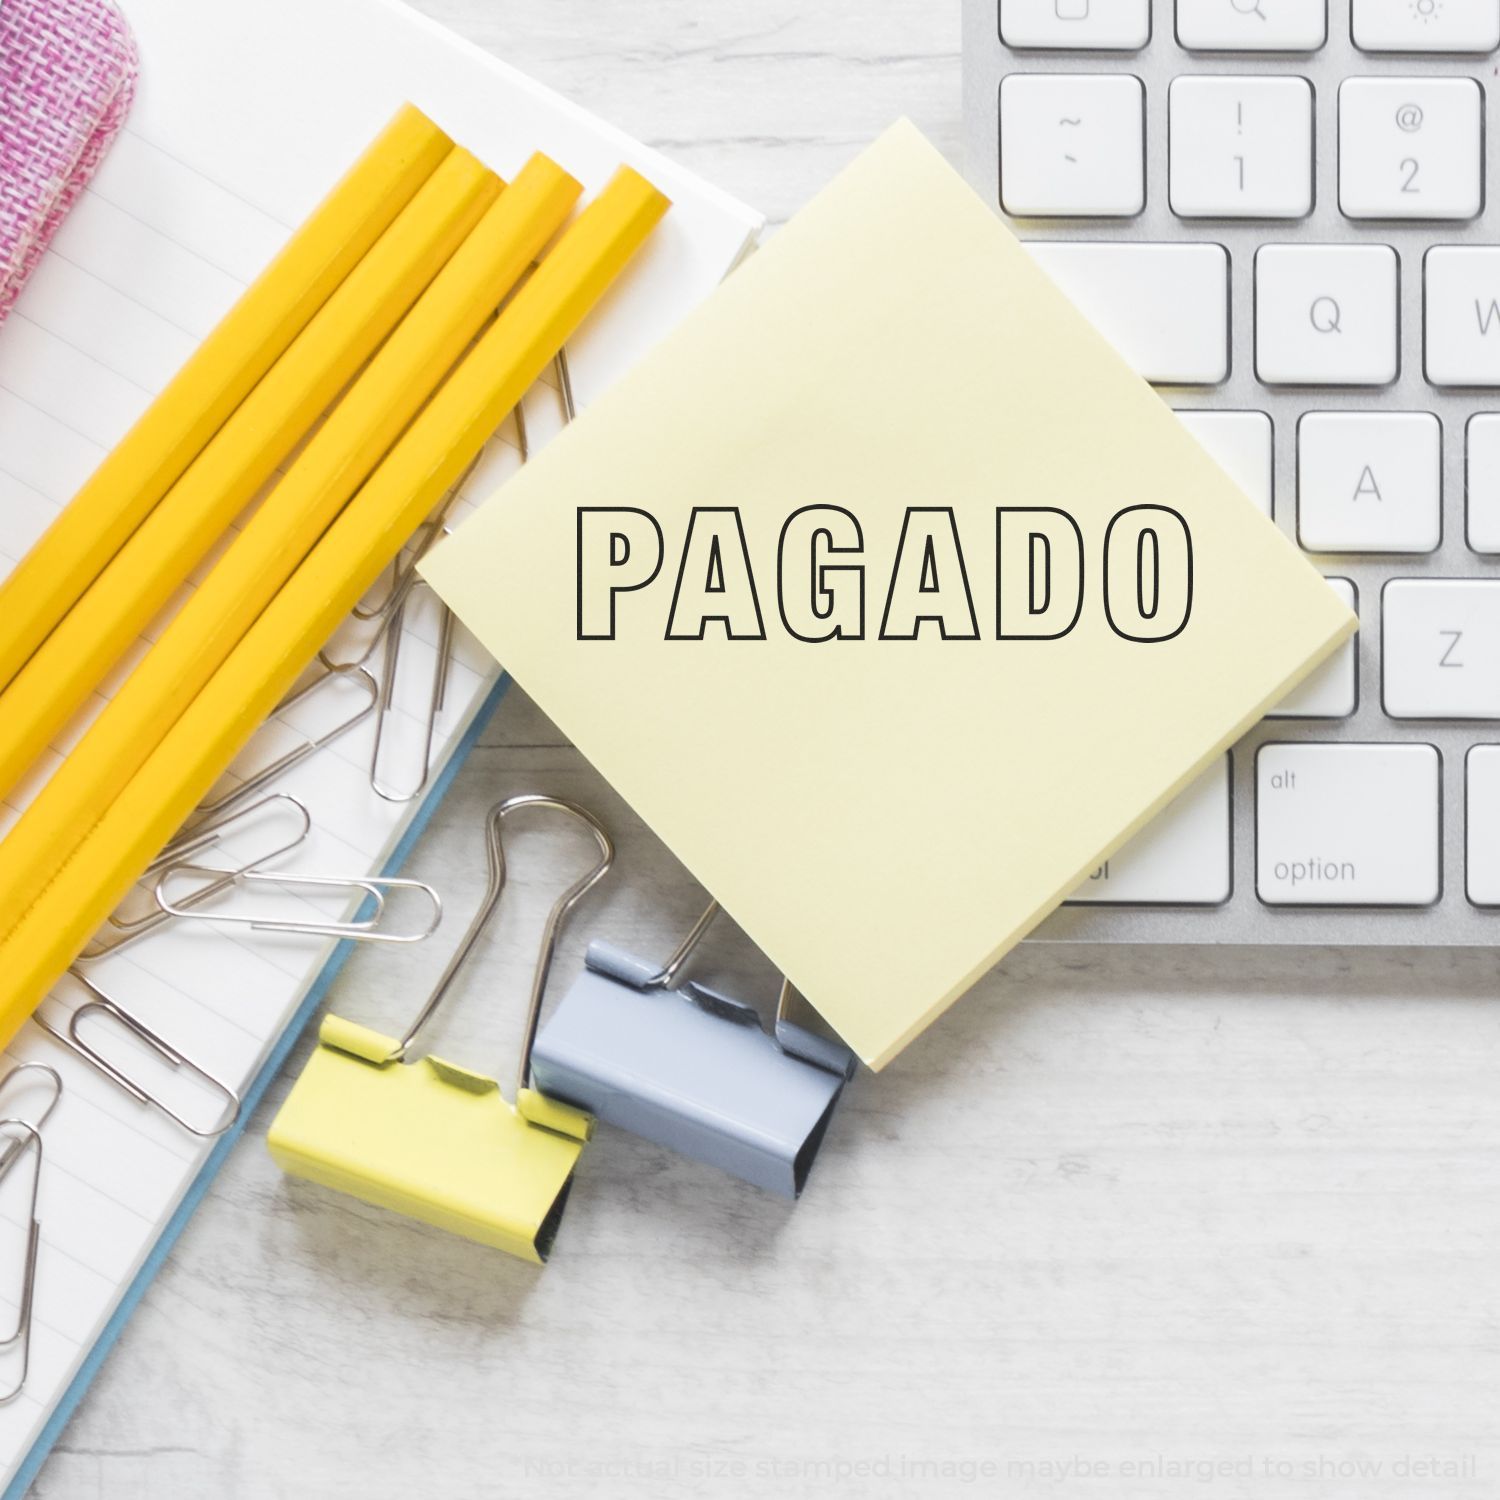 A self-inking stamp with a stamped image showing how the text "PAGADO" in an outline style is displayed after stamping.